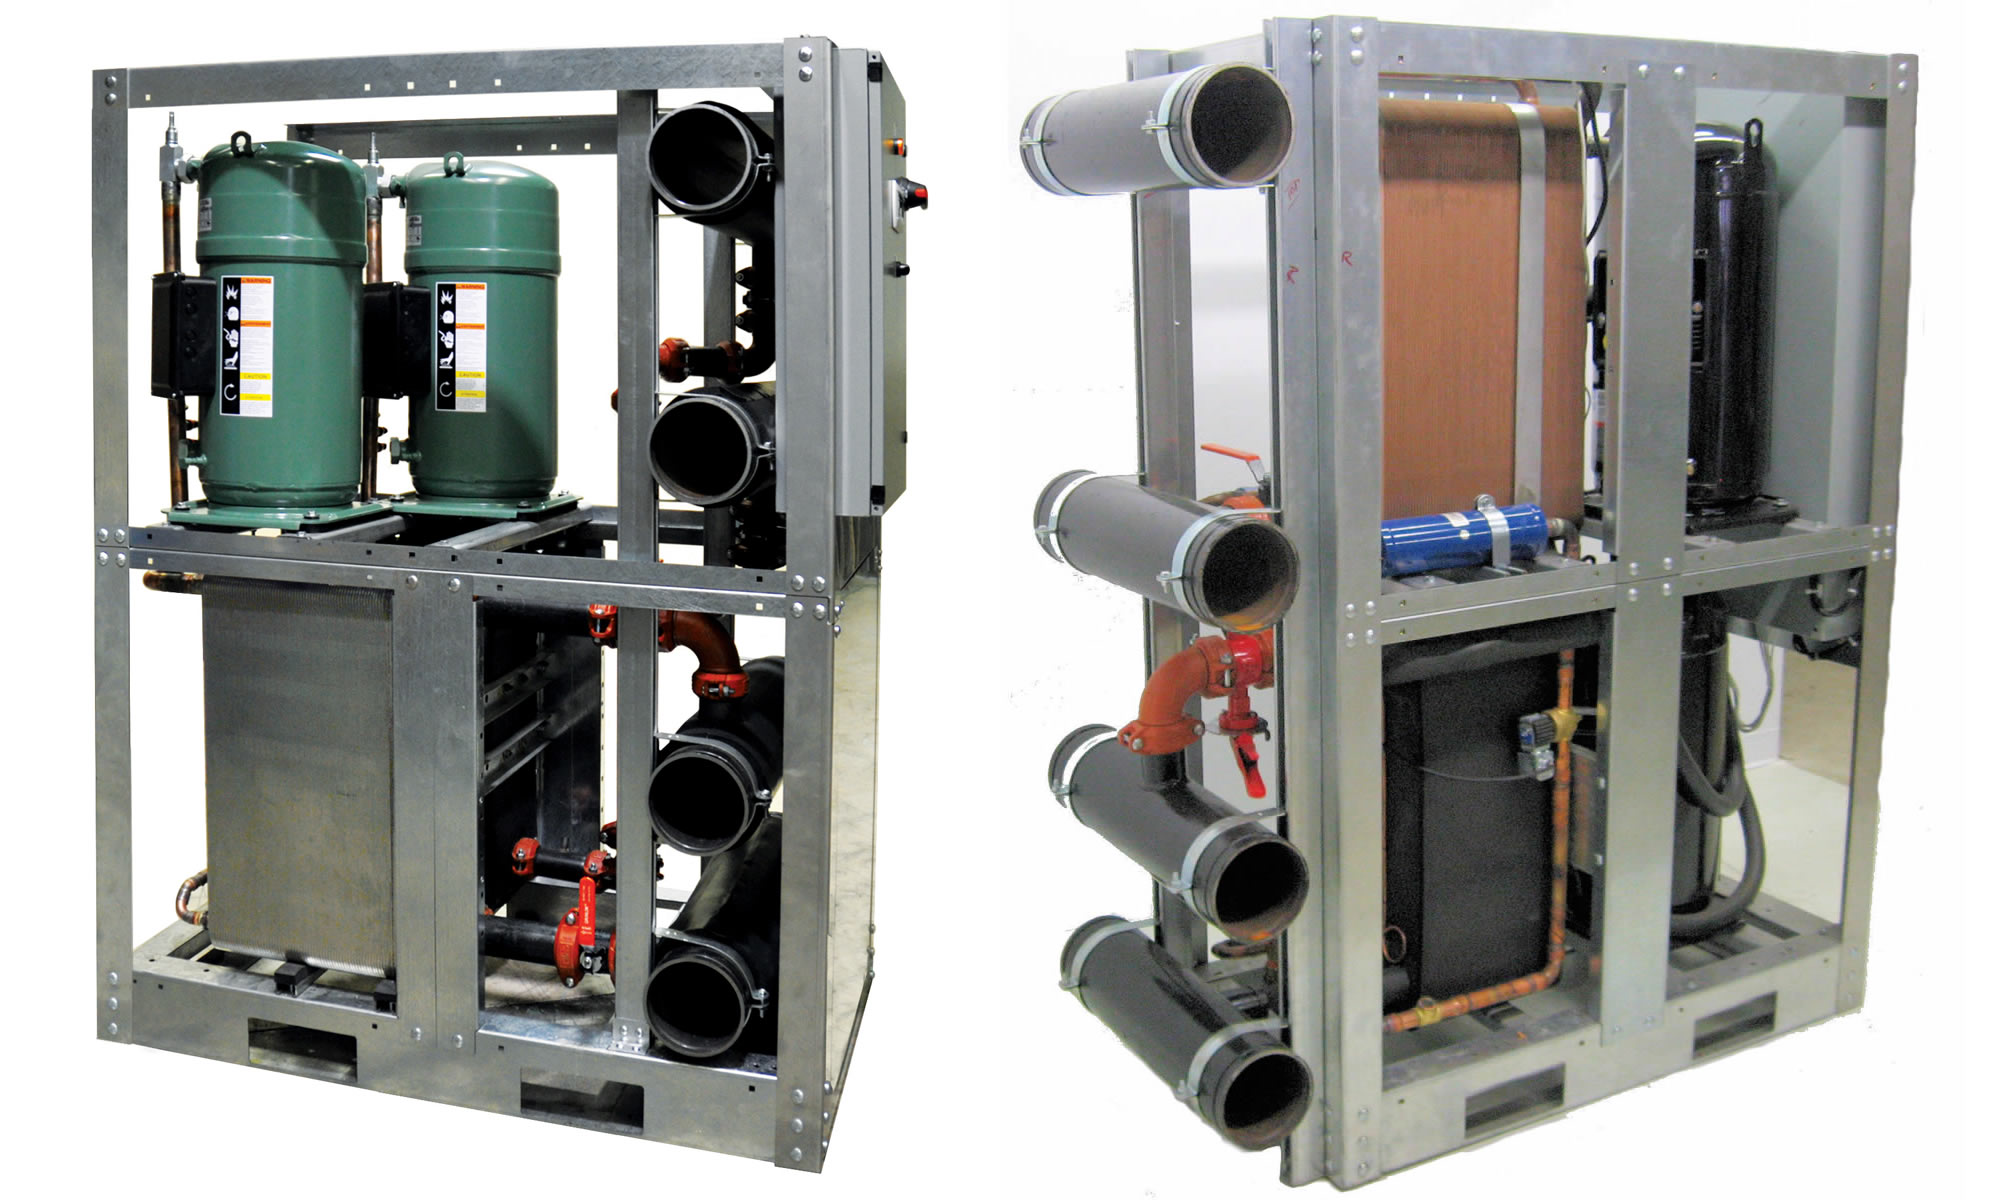 Why Choose Modular Chillers